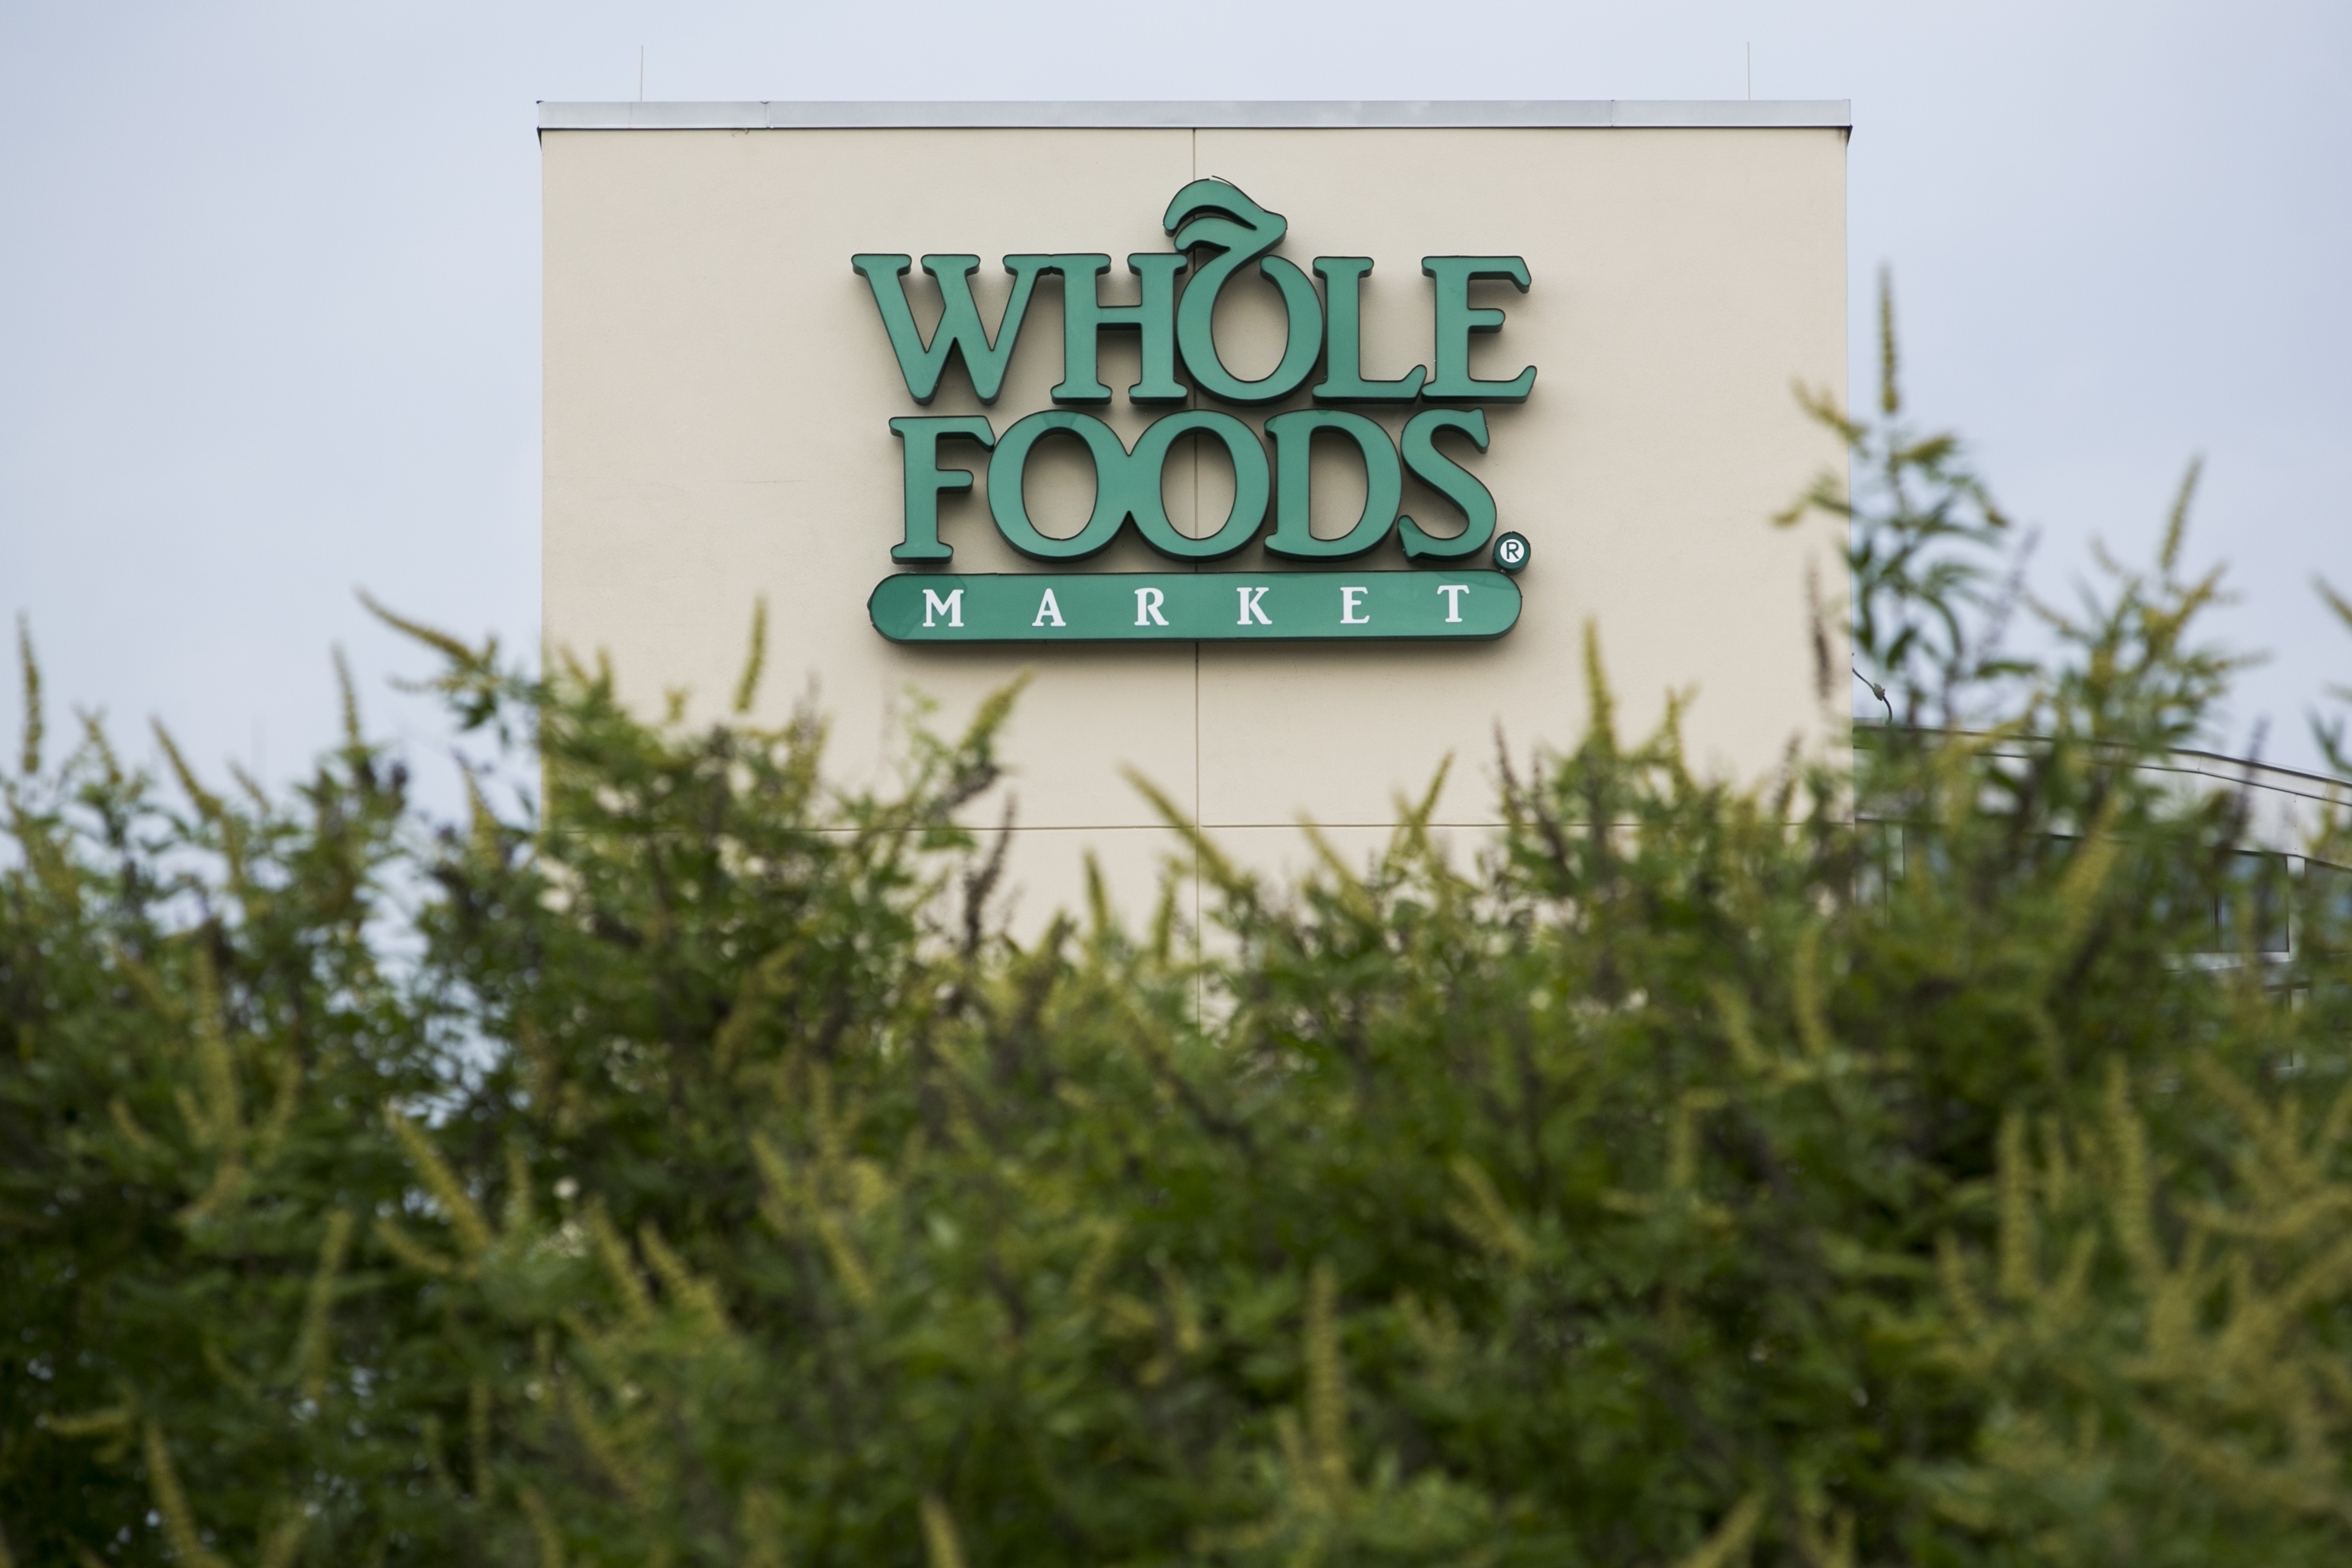 The headquarters and a store location of Whole Foods Market Inc., in Austin, Texas on Sept. 11, 2015. (Kris Tripplaar—Sipa USA)